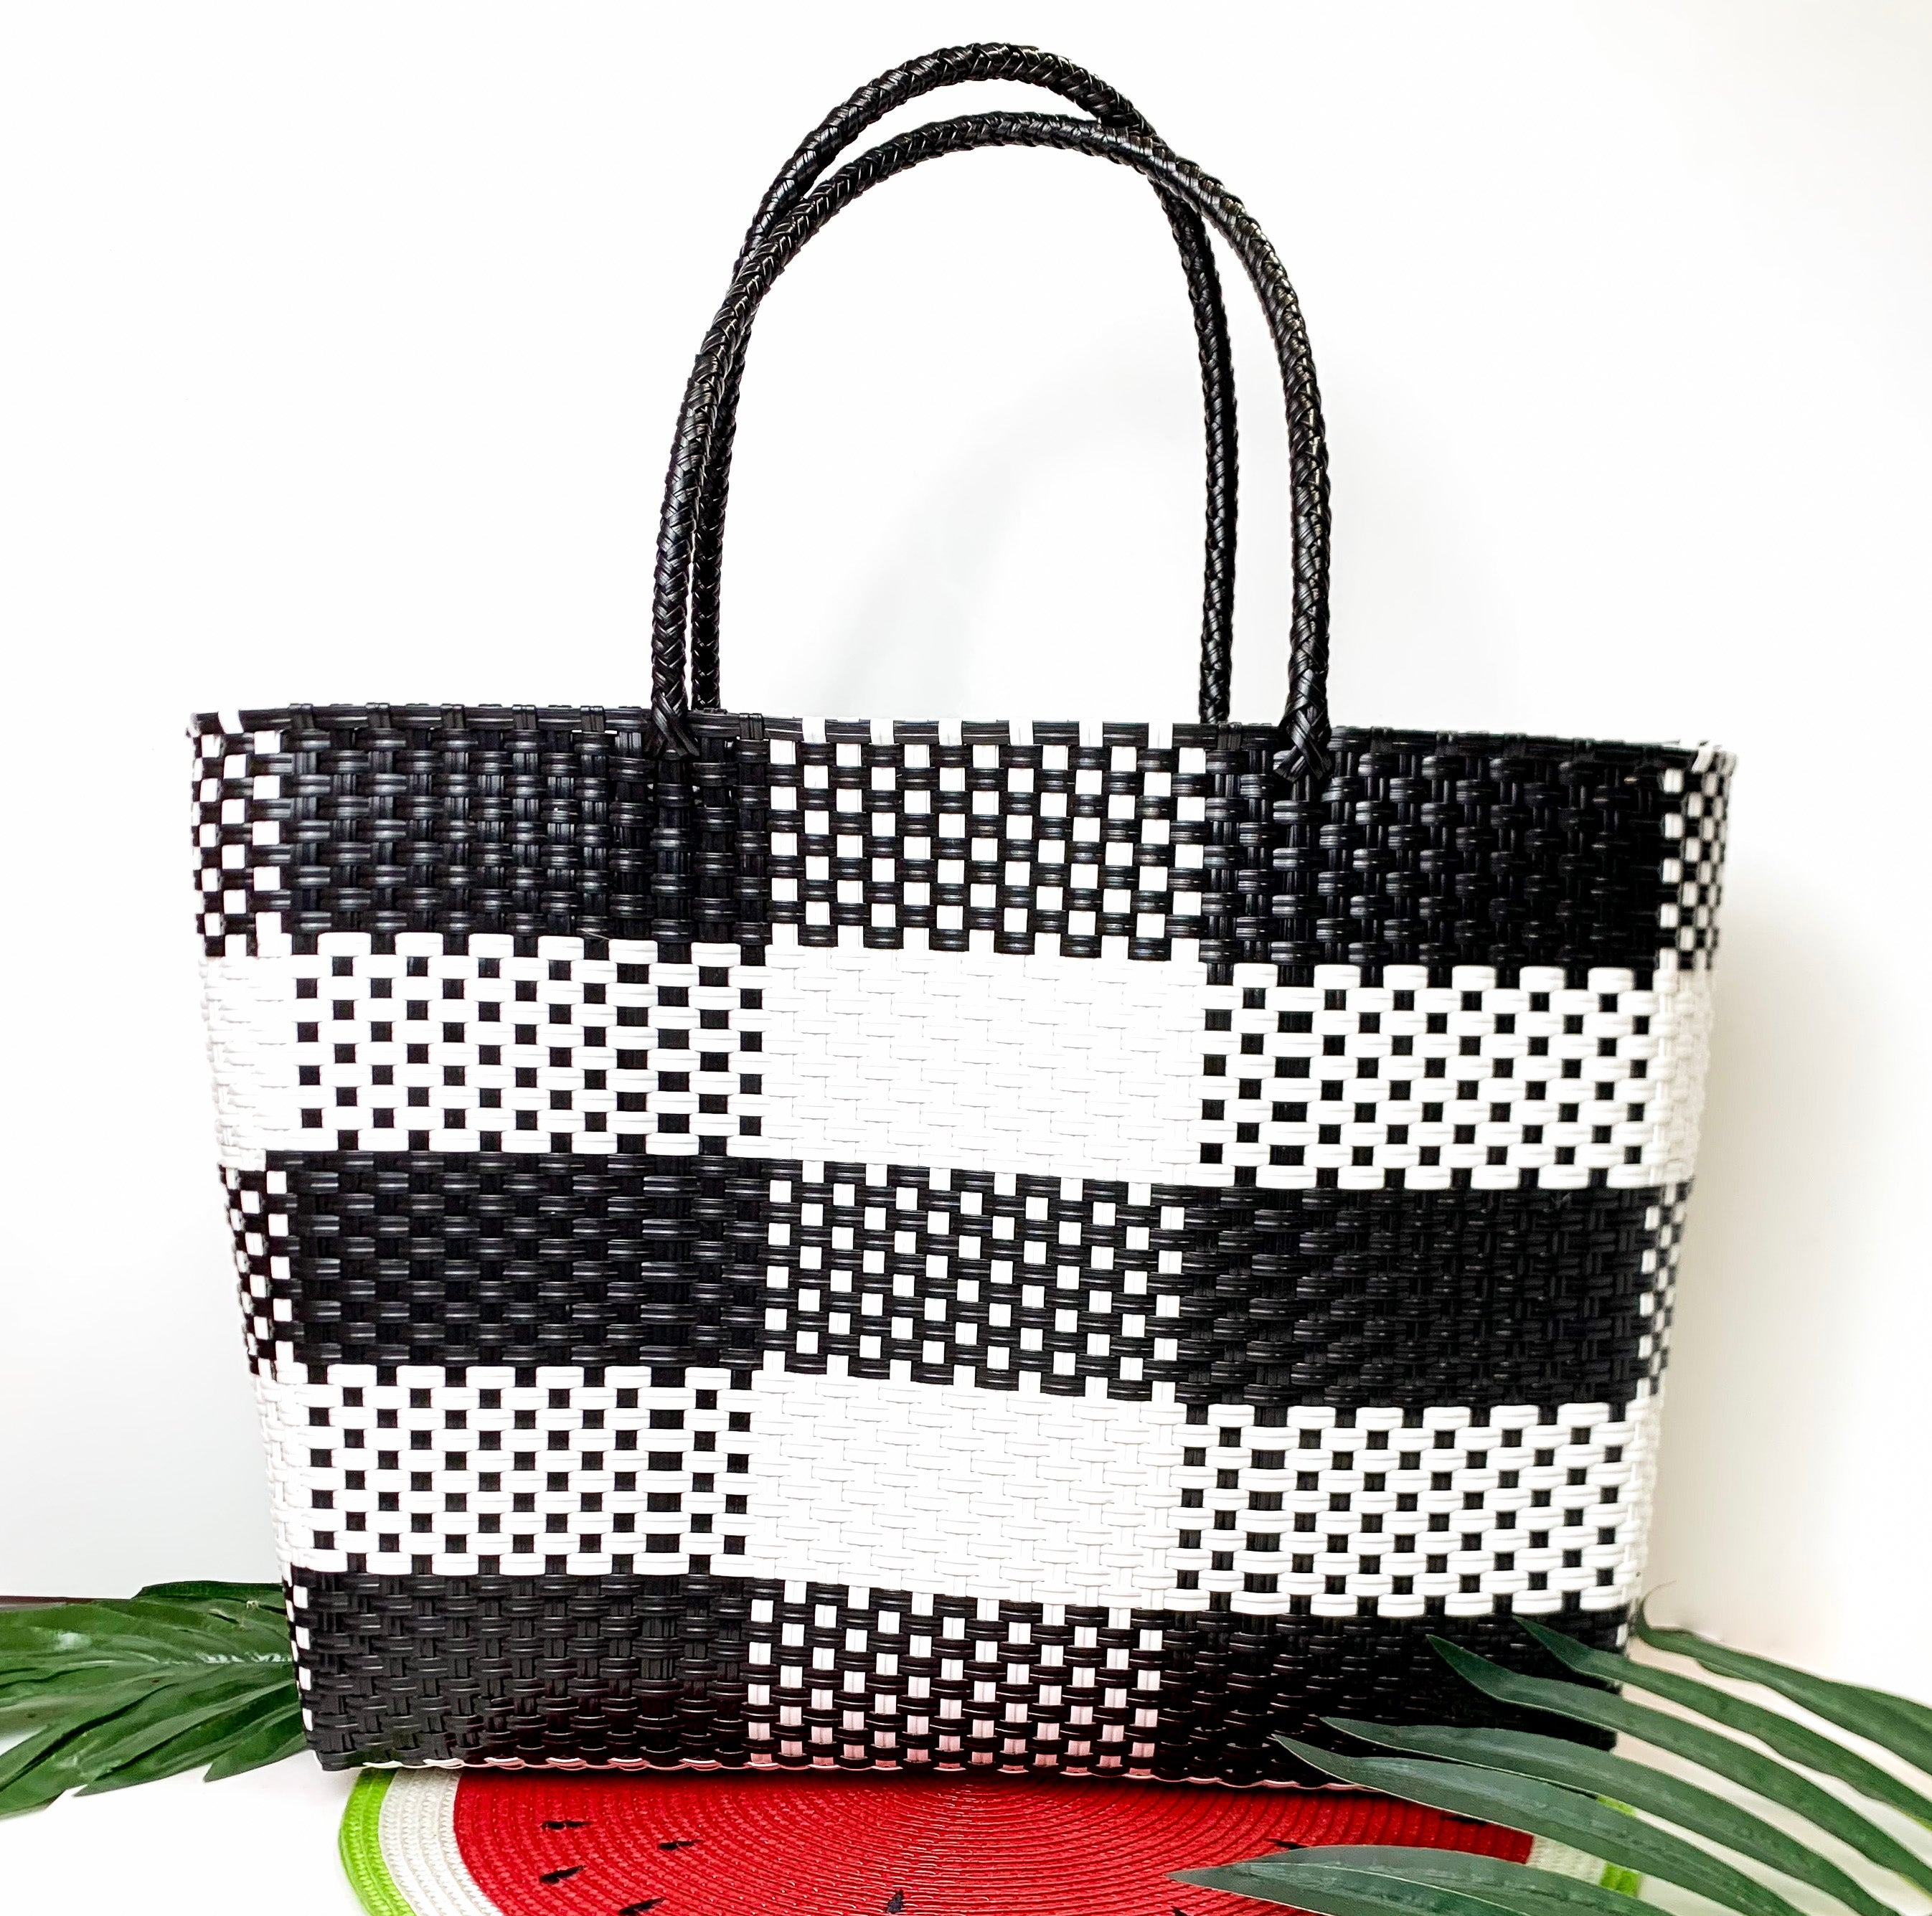 Garden Party Gingham Tote Bag in Black and White - Giddy Up Glamour Boutique